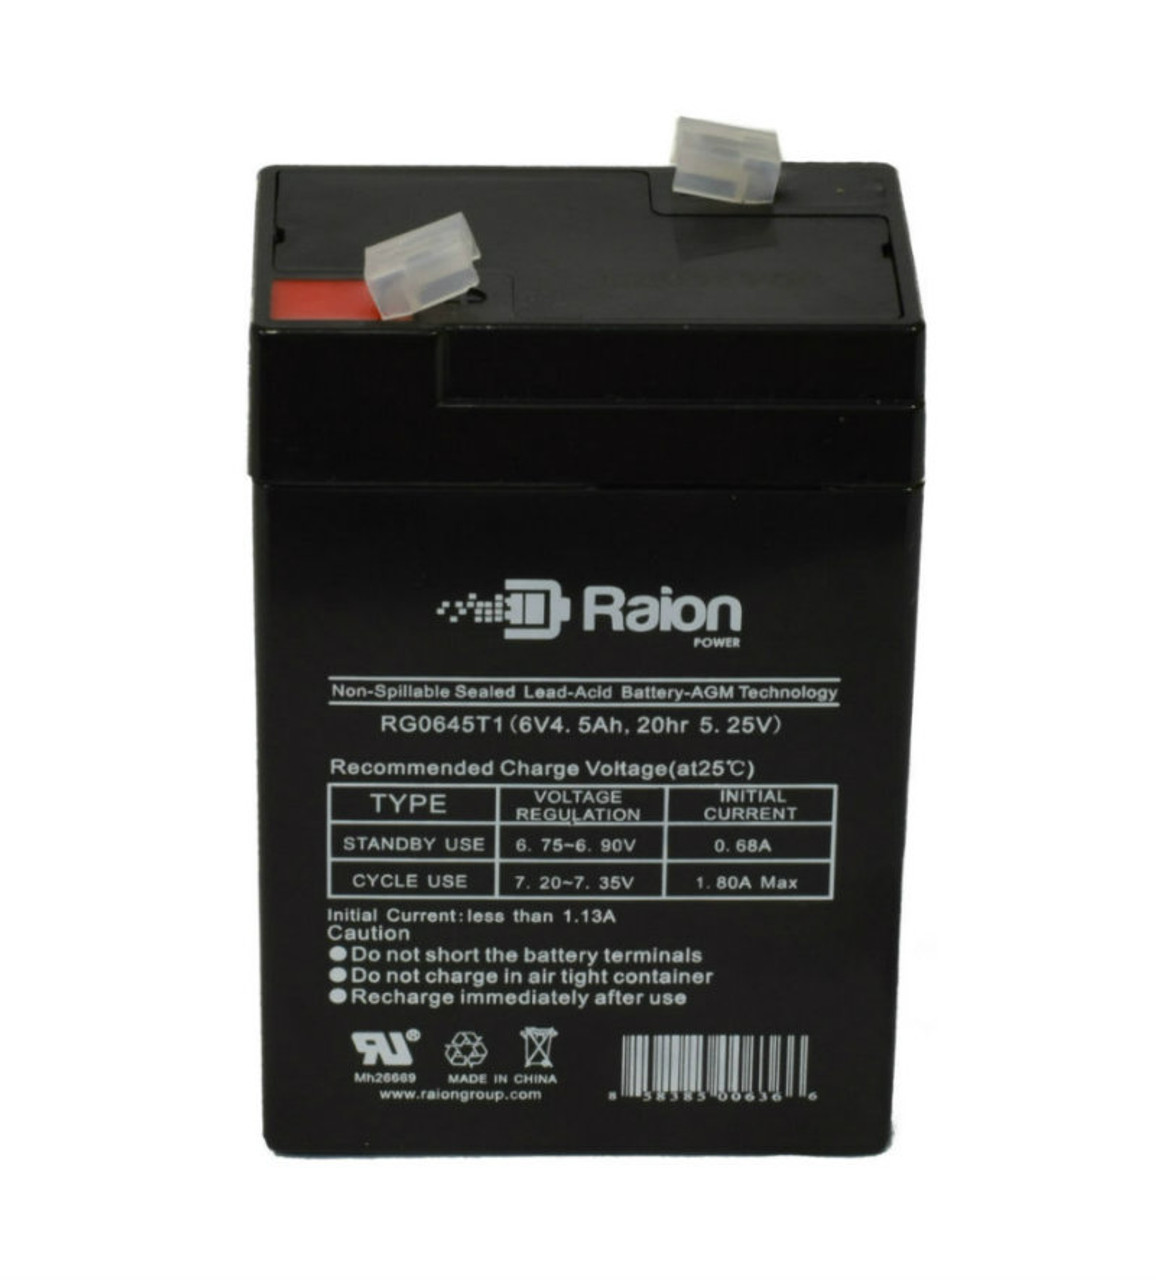 Raion Power RG0645T1 Replacement Battery Cartridge for Kid Trax KT1501WM Disney Princess Enchanted Adventure Carriage